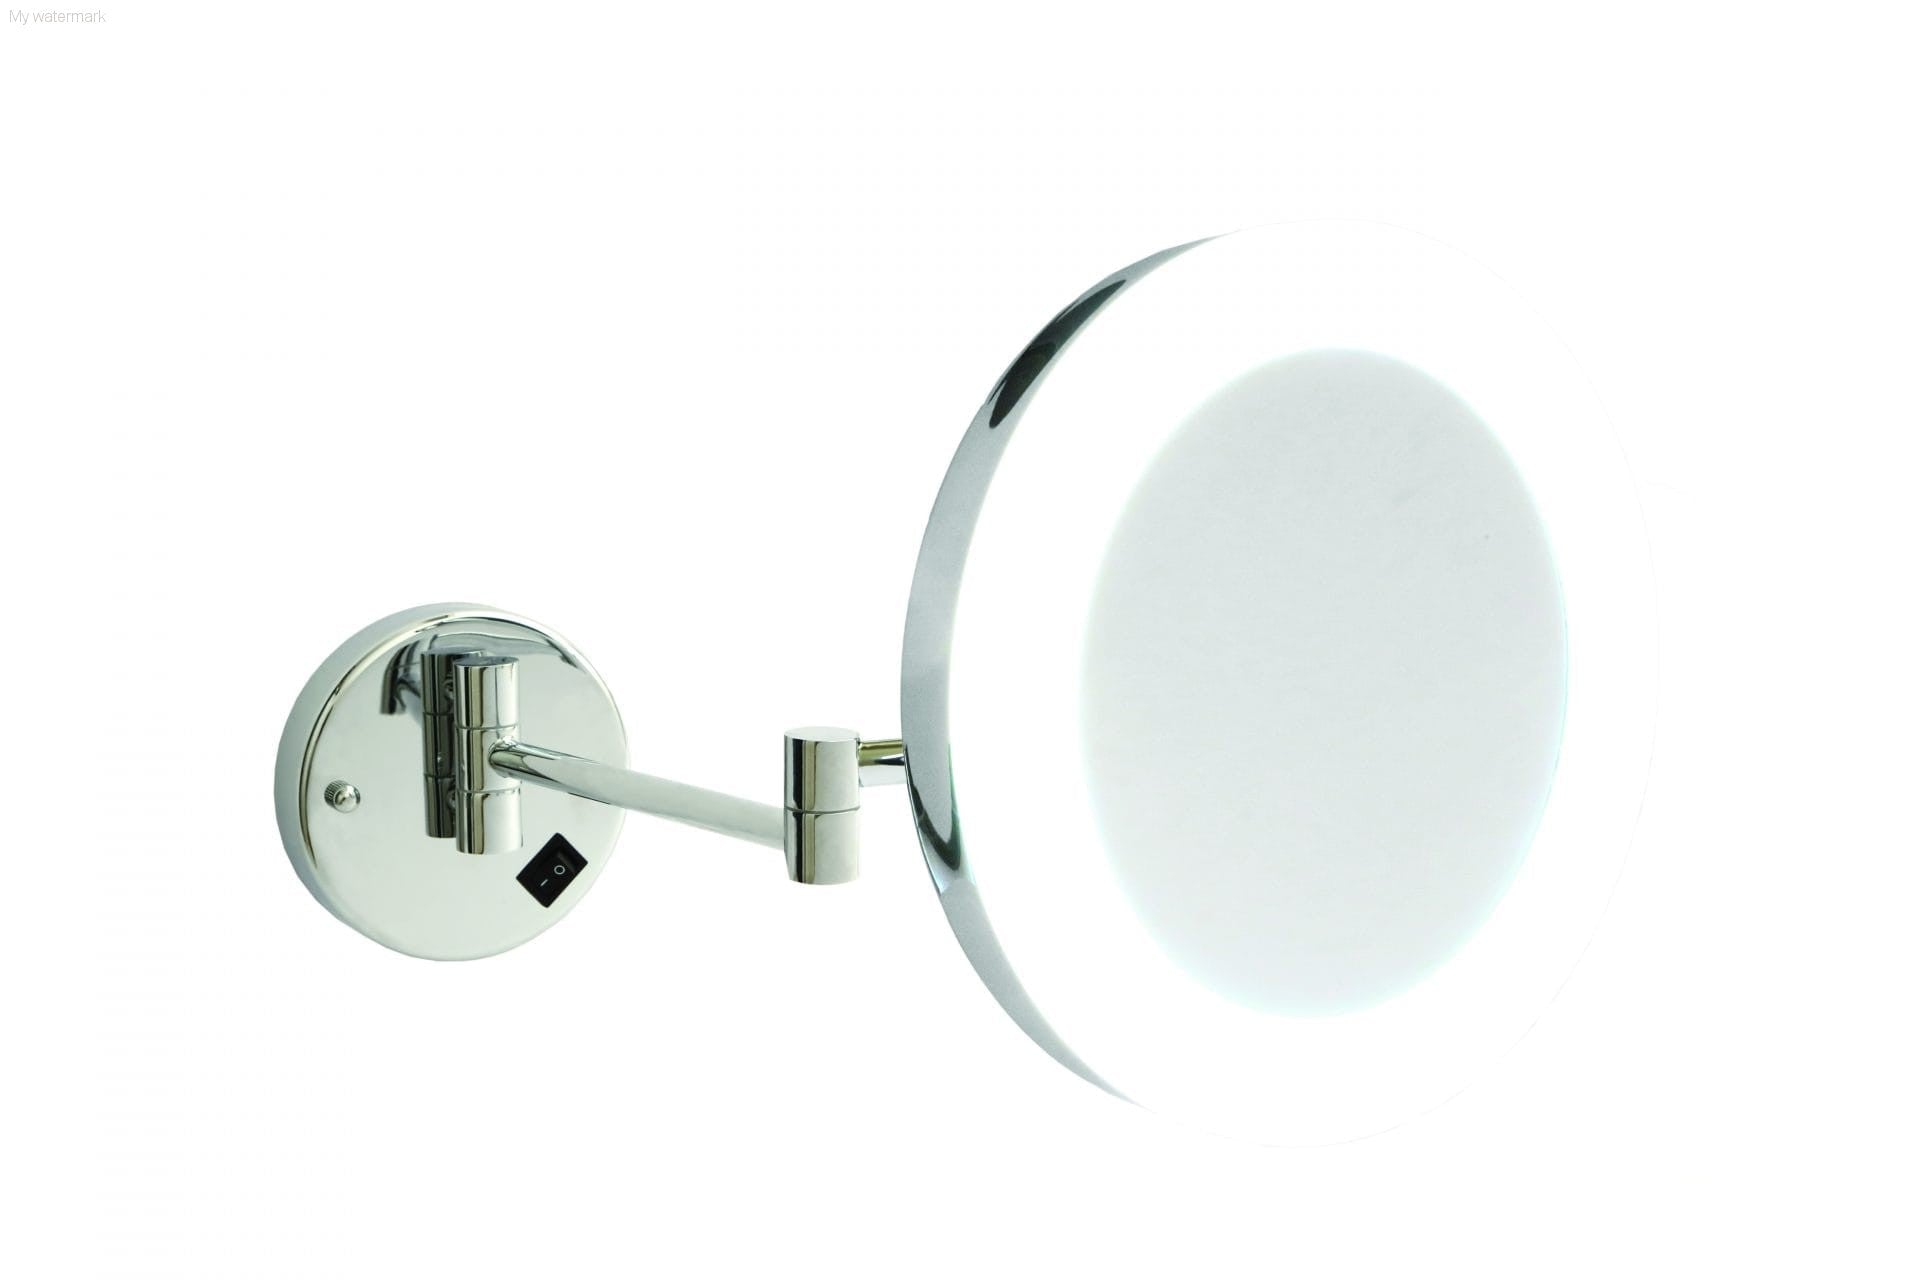 Ablaze 7x Magnification Chrome Wall Mounted Shaving Mirror, 200mm Diameter with Concealed Wiring